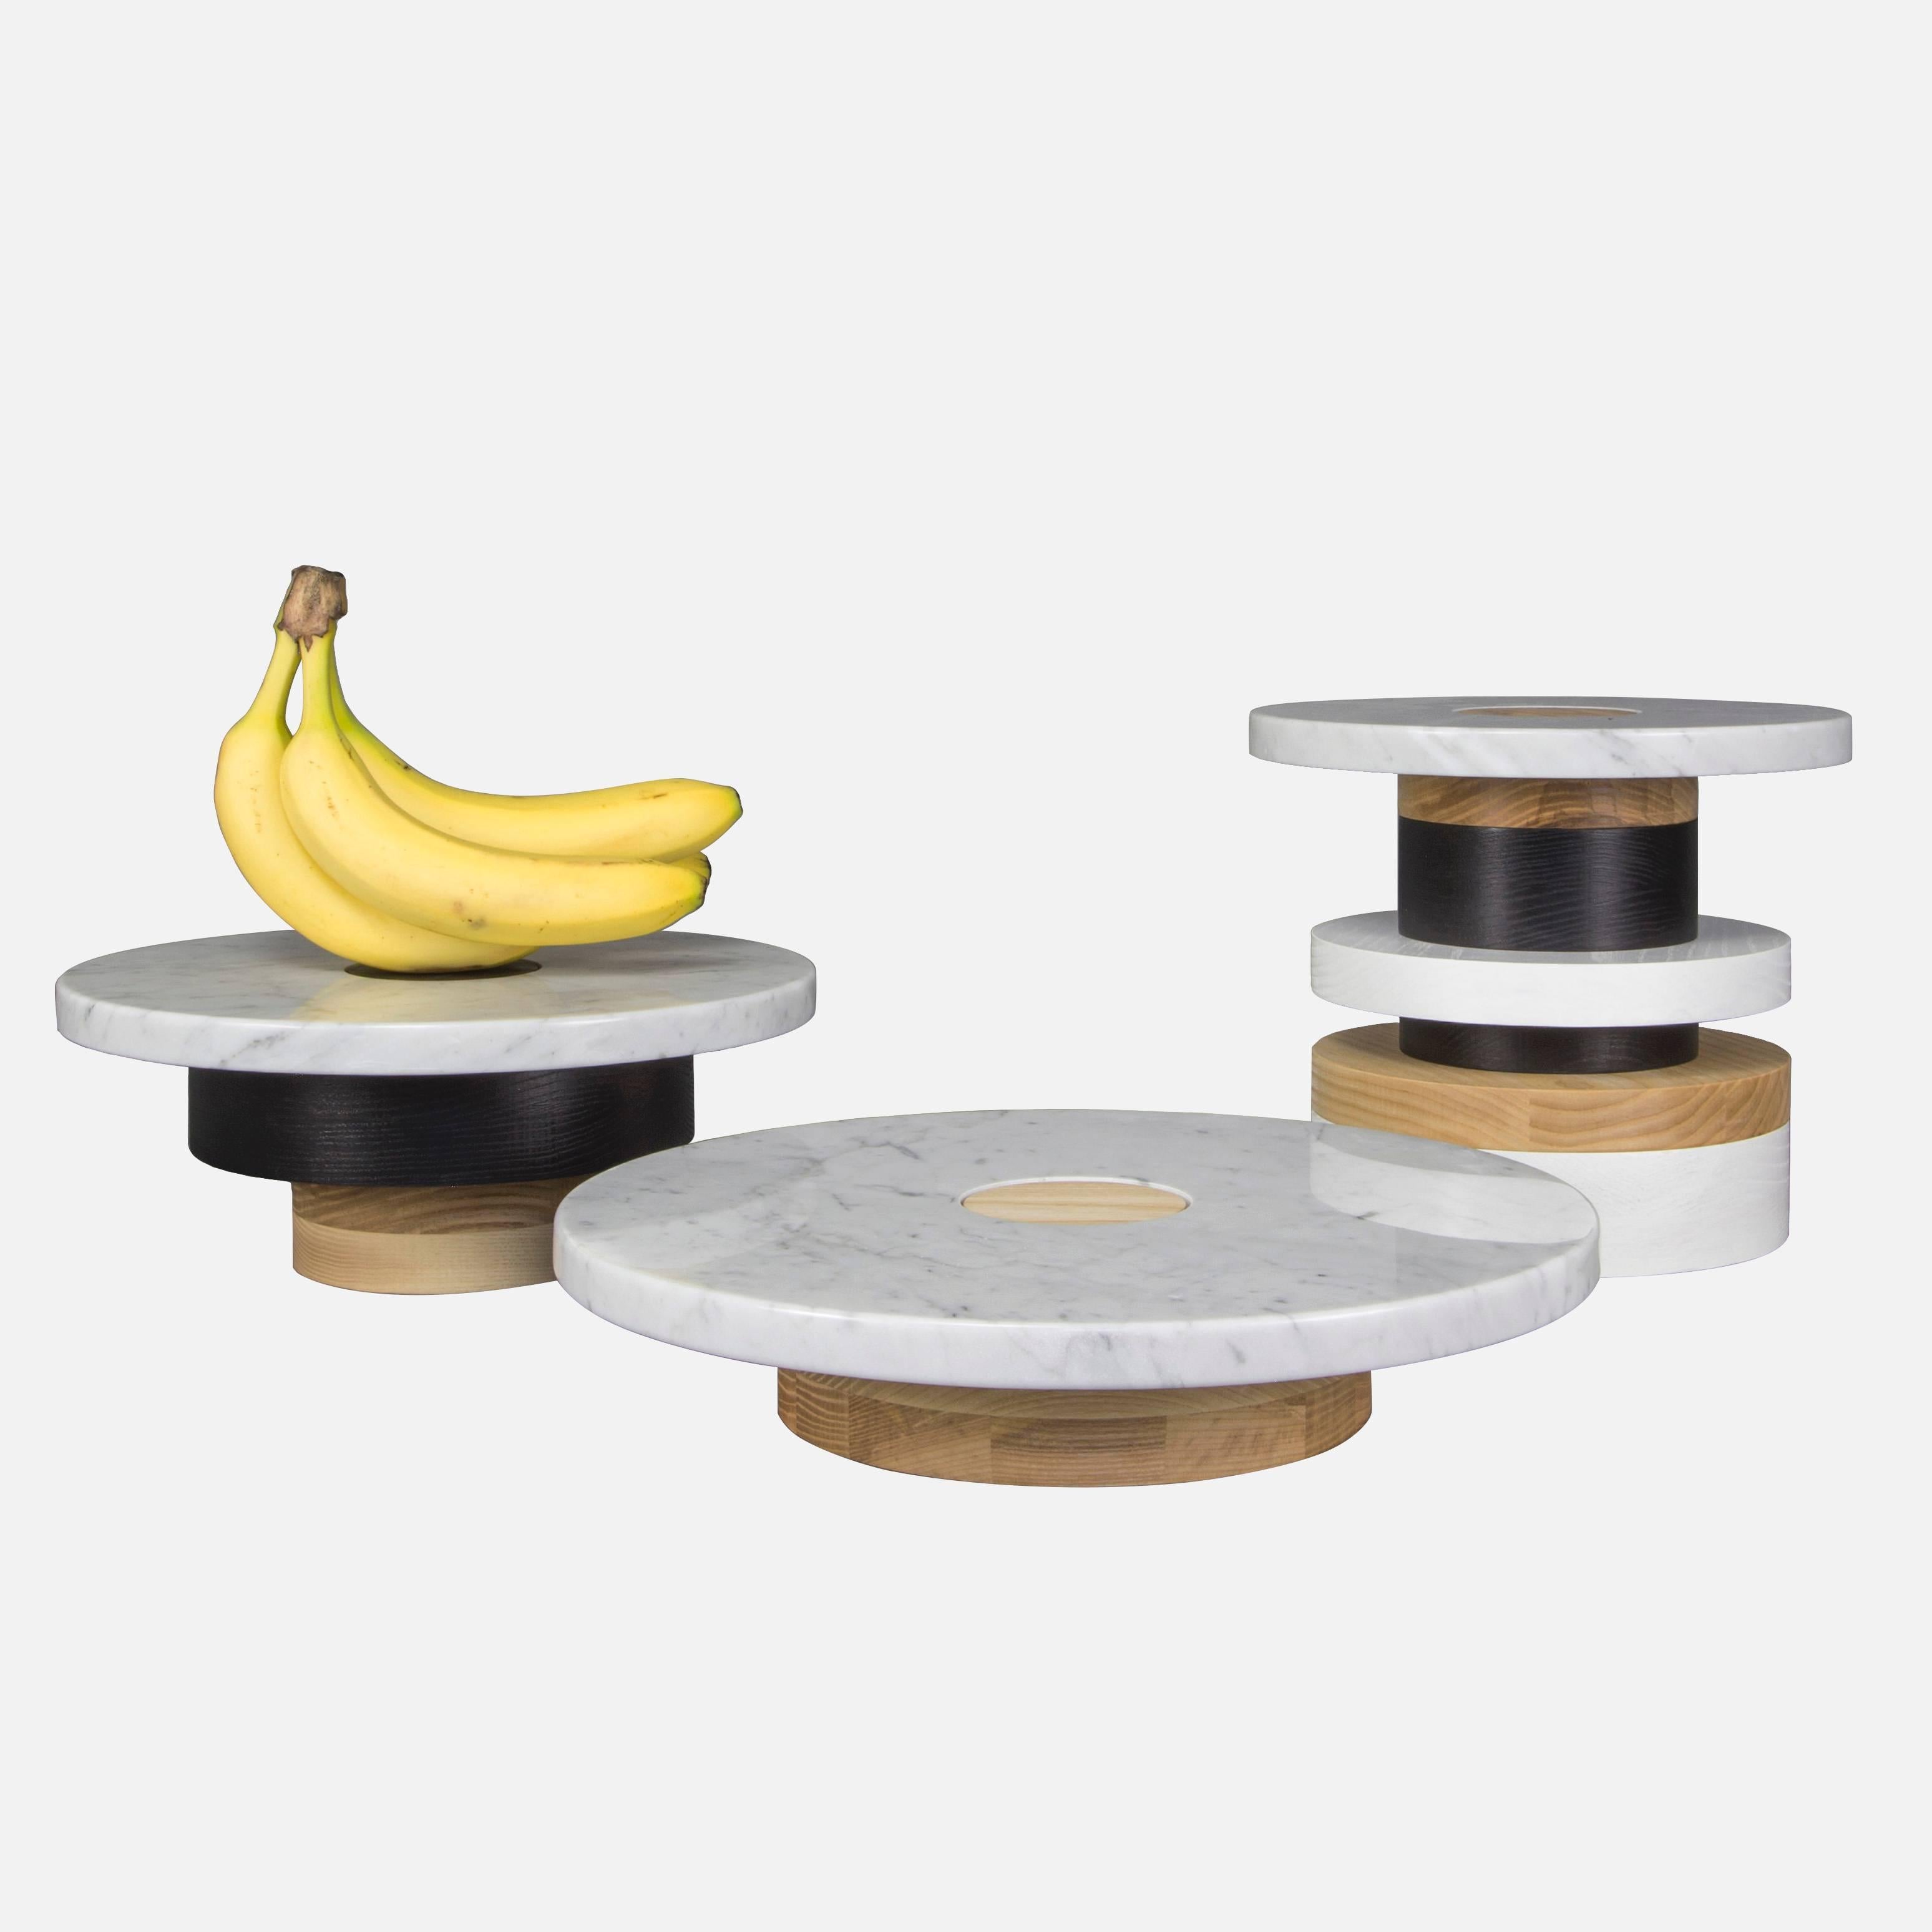 The Sottsass-inspired “Sass Pedestals” are simple, sculptural accents for your home or retail display. Made from stacked wooden bases and a polished marble top, Sass pedestals are perfect for serving your favourite edible treats, displaying your